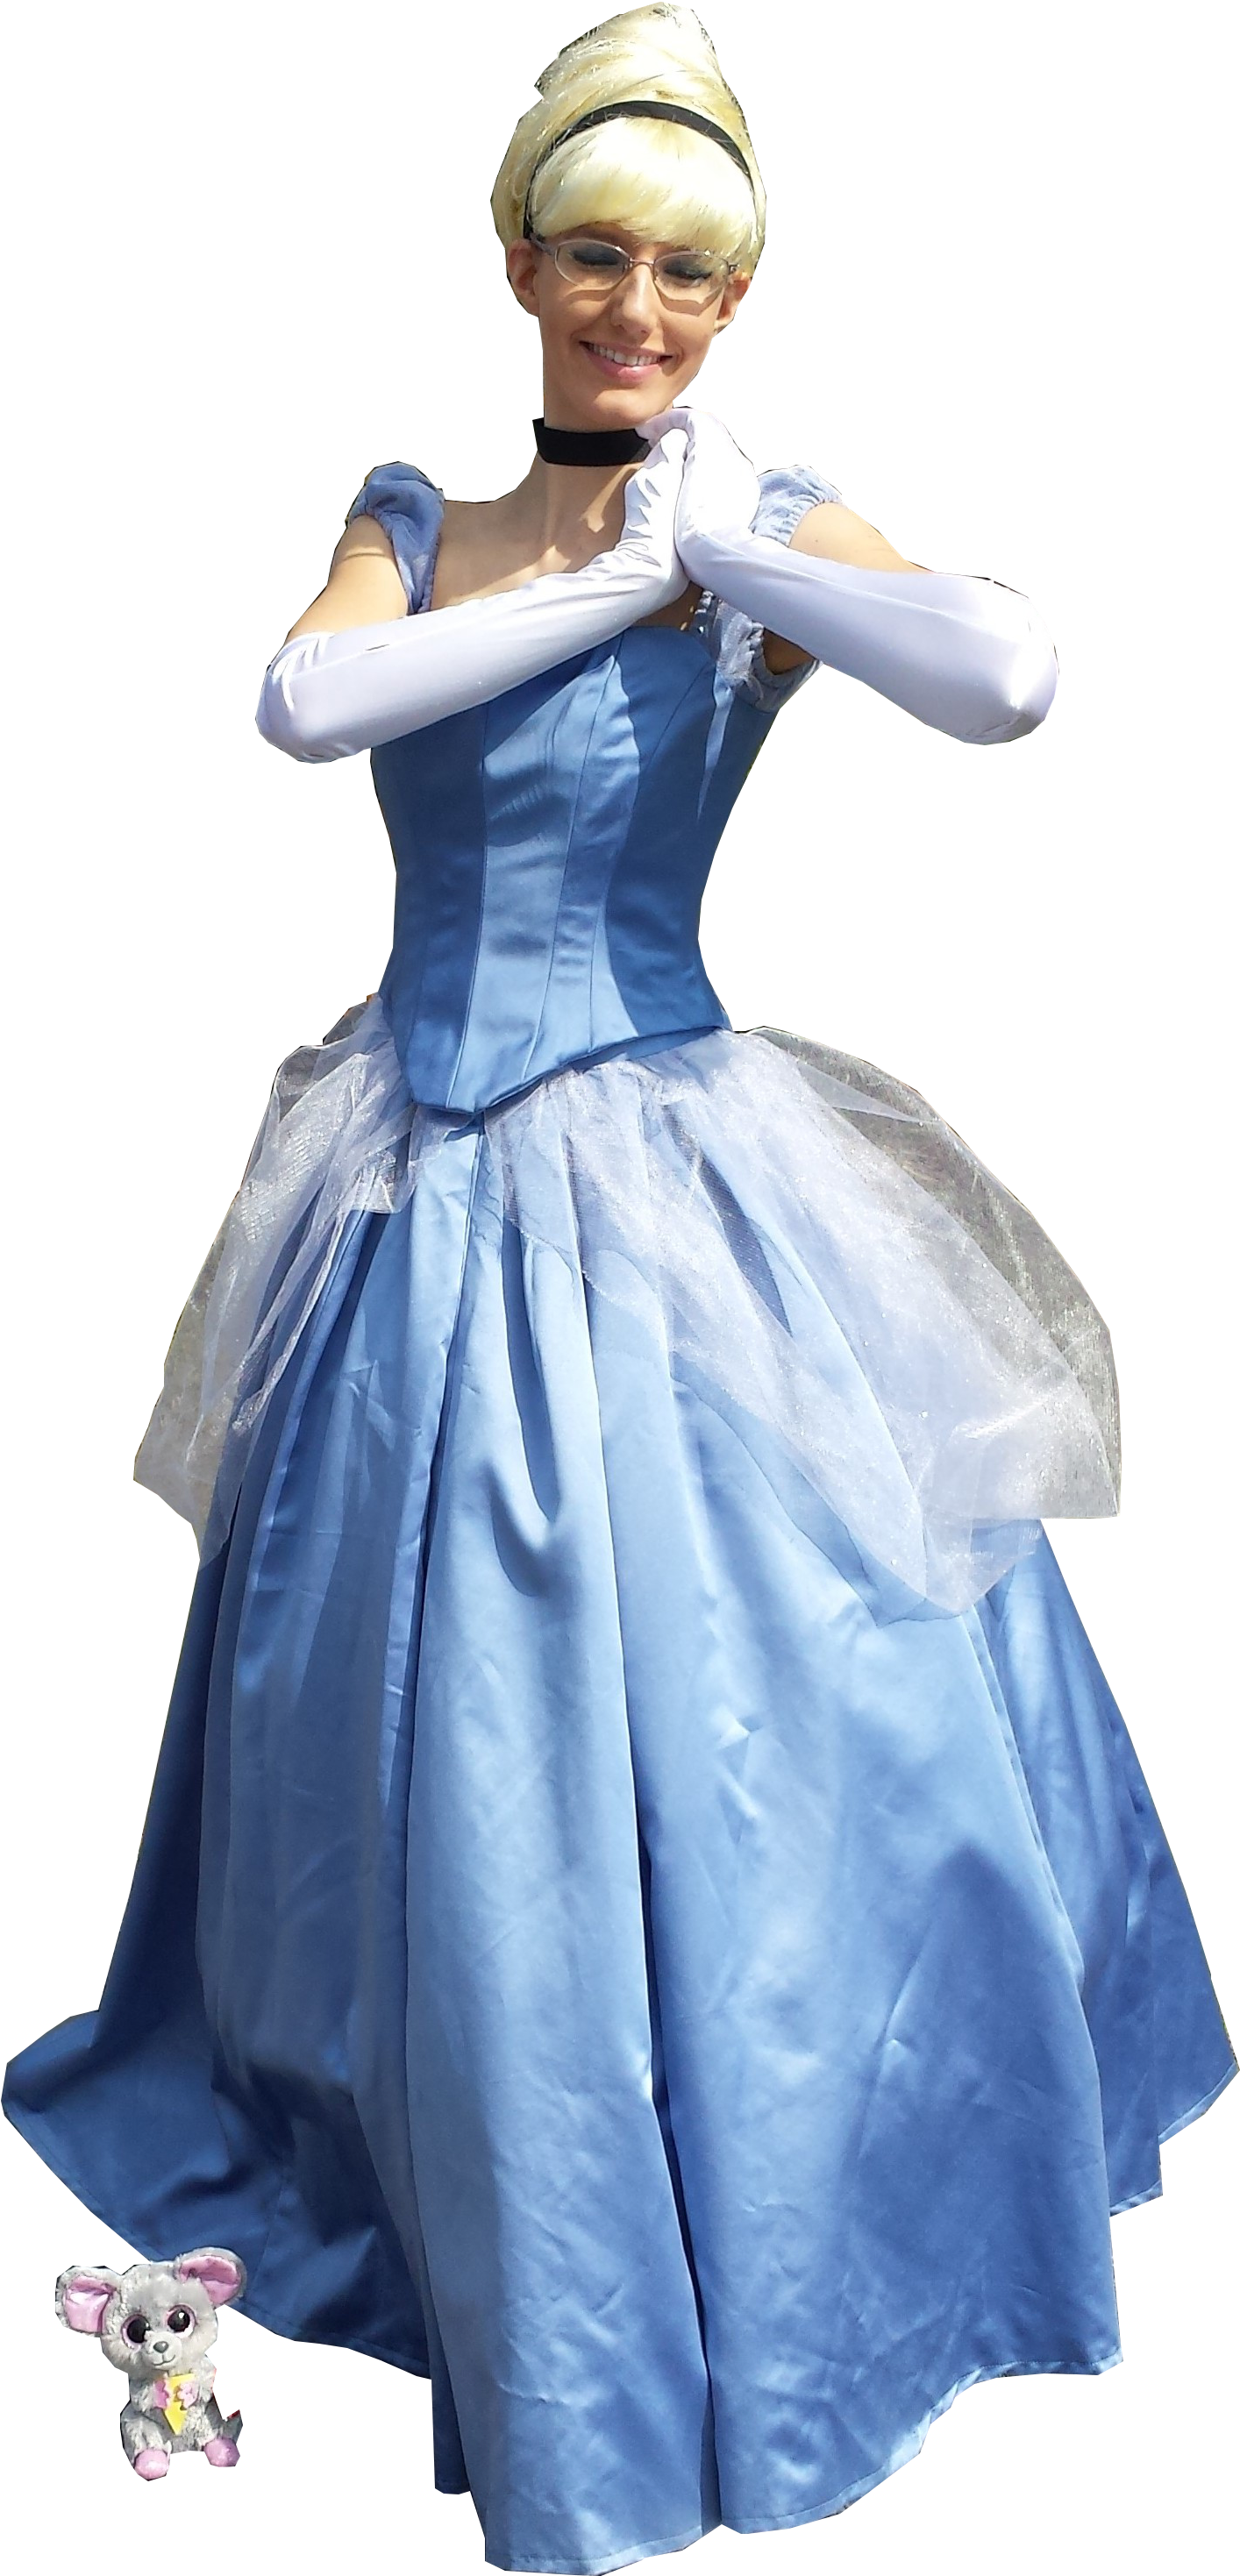 2017 Time Travel Costumes Cinderella Gown Dress Costume - Costume (1425x2948)